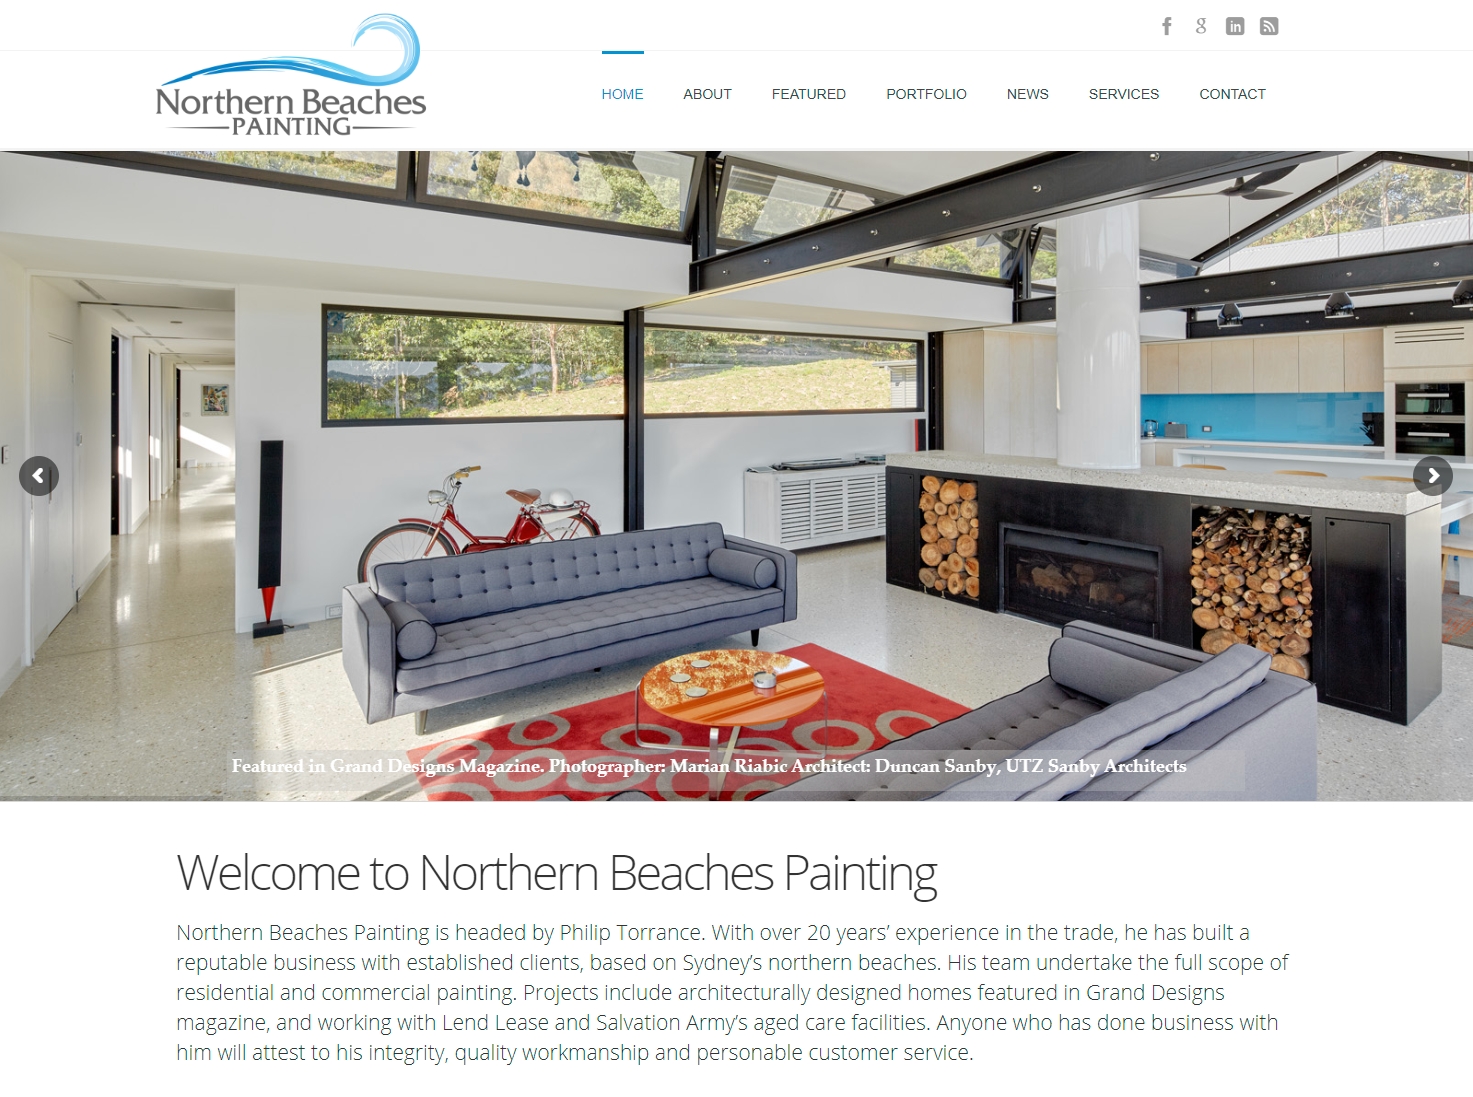 Northern Beaches Painting